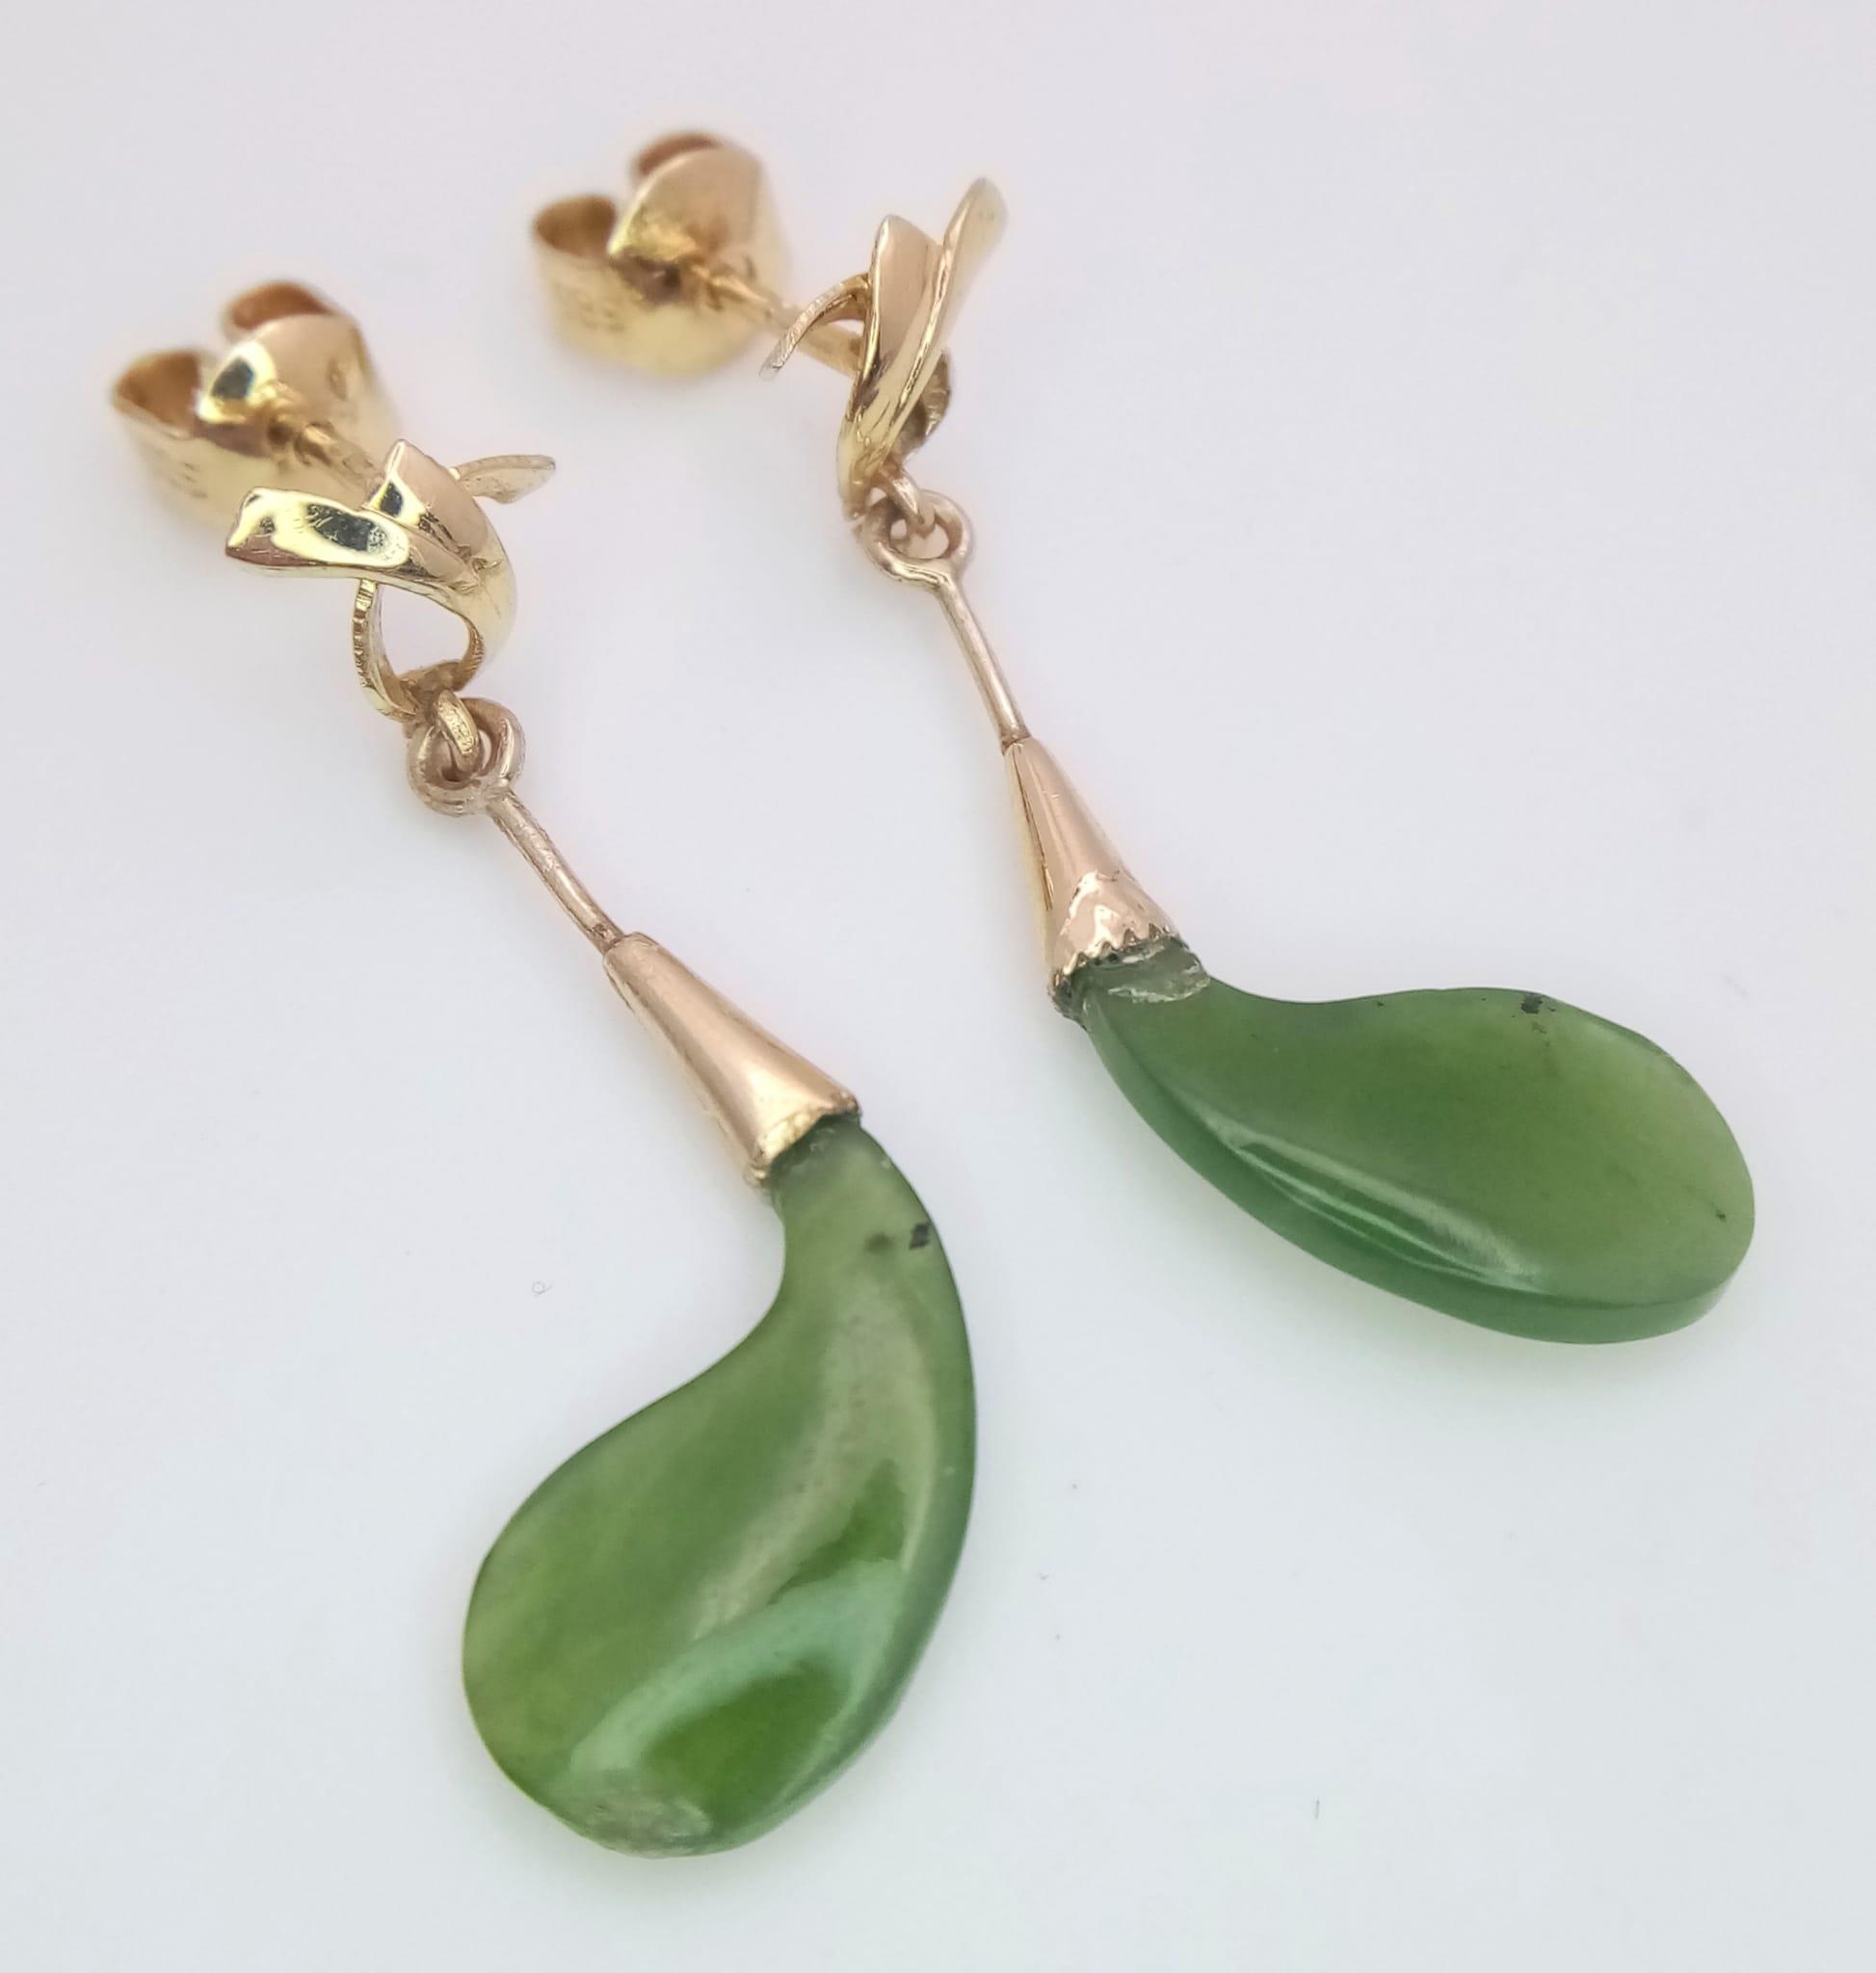 A Pair of 14K Yellow Gold and Jade Earrings. 2.4g total weight.